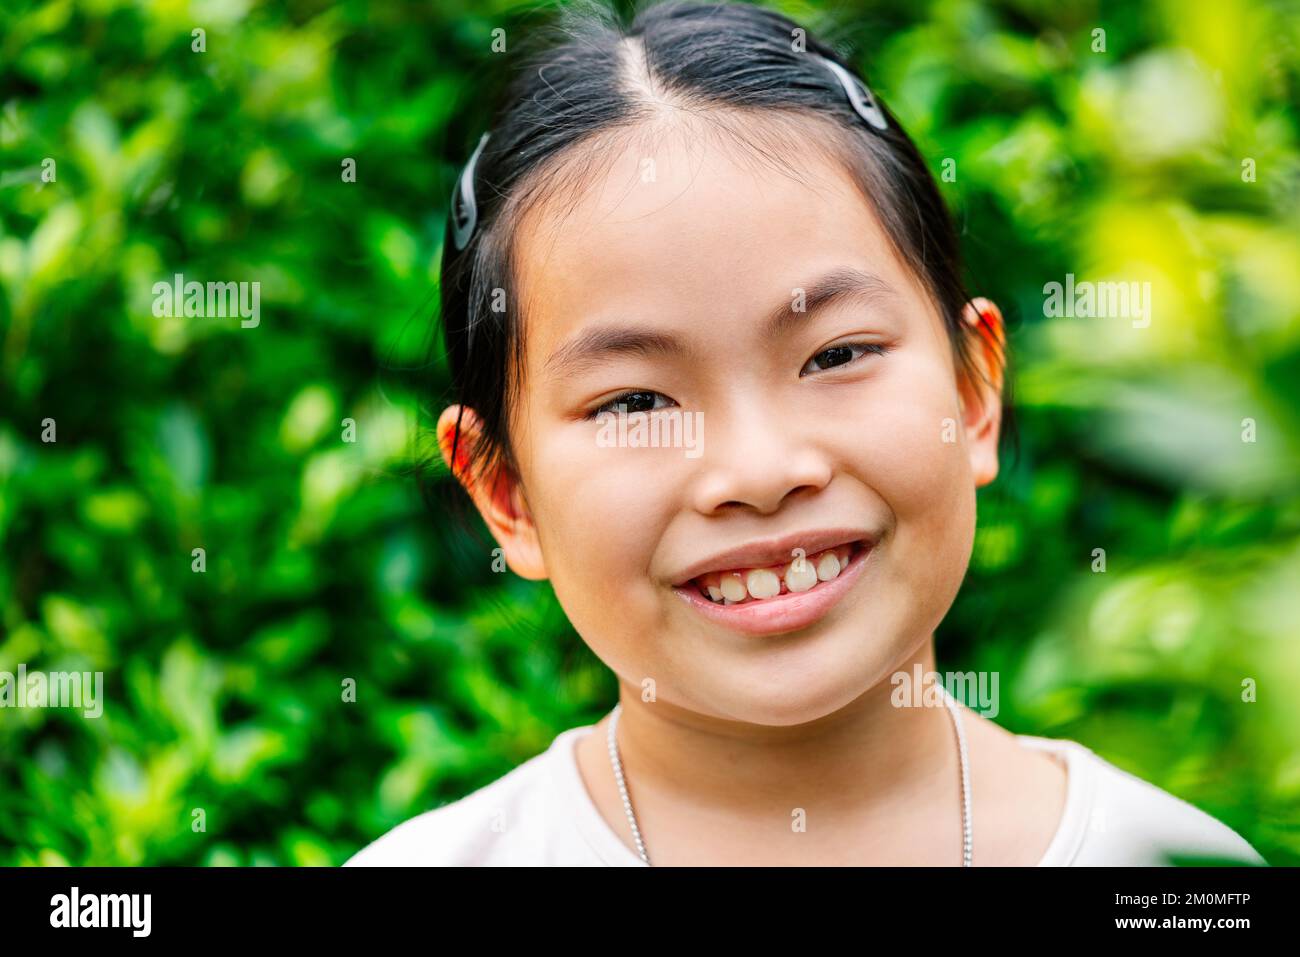 Portrait of cute and healthy Asian child girl in 8 to 9 years old, close up to face, smiling, looking at camera, outdoor image, blurred background of Stock Photo